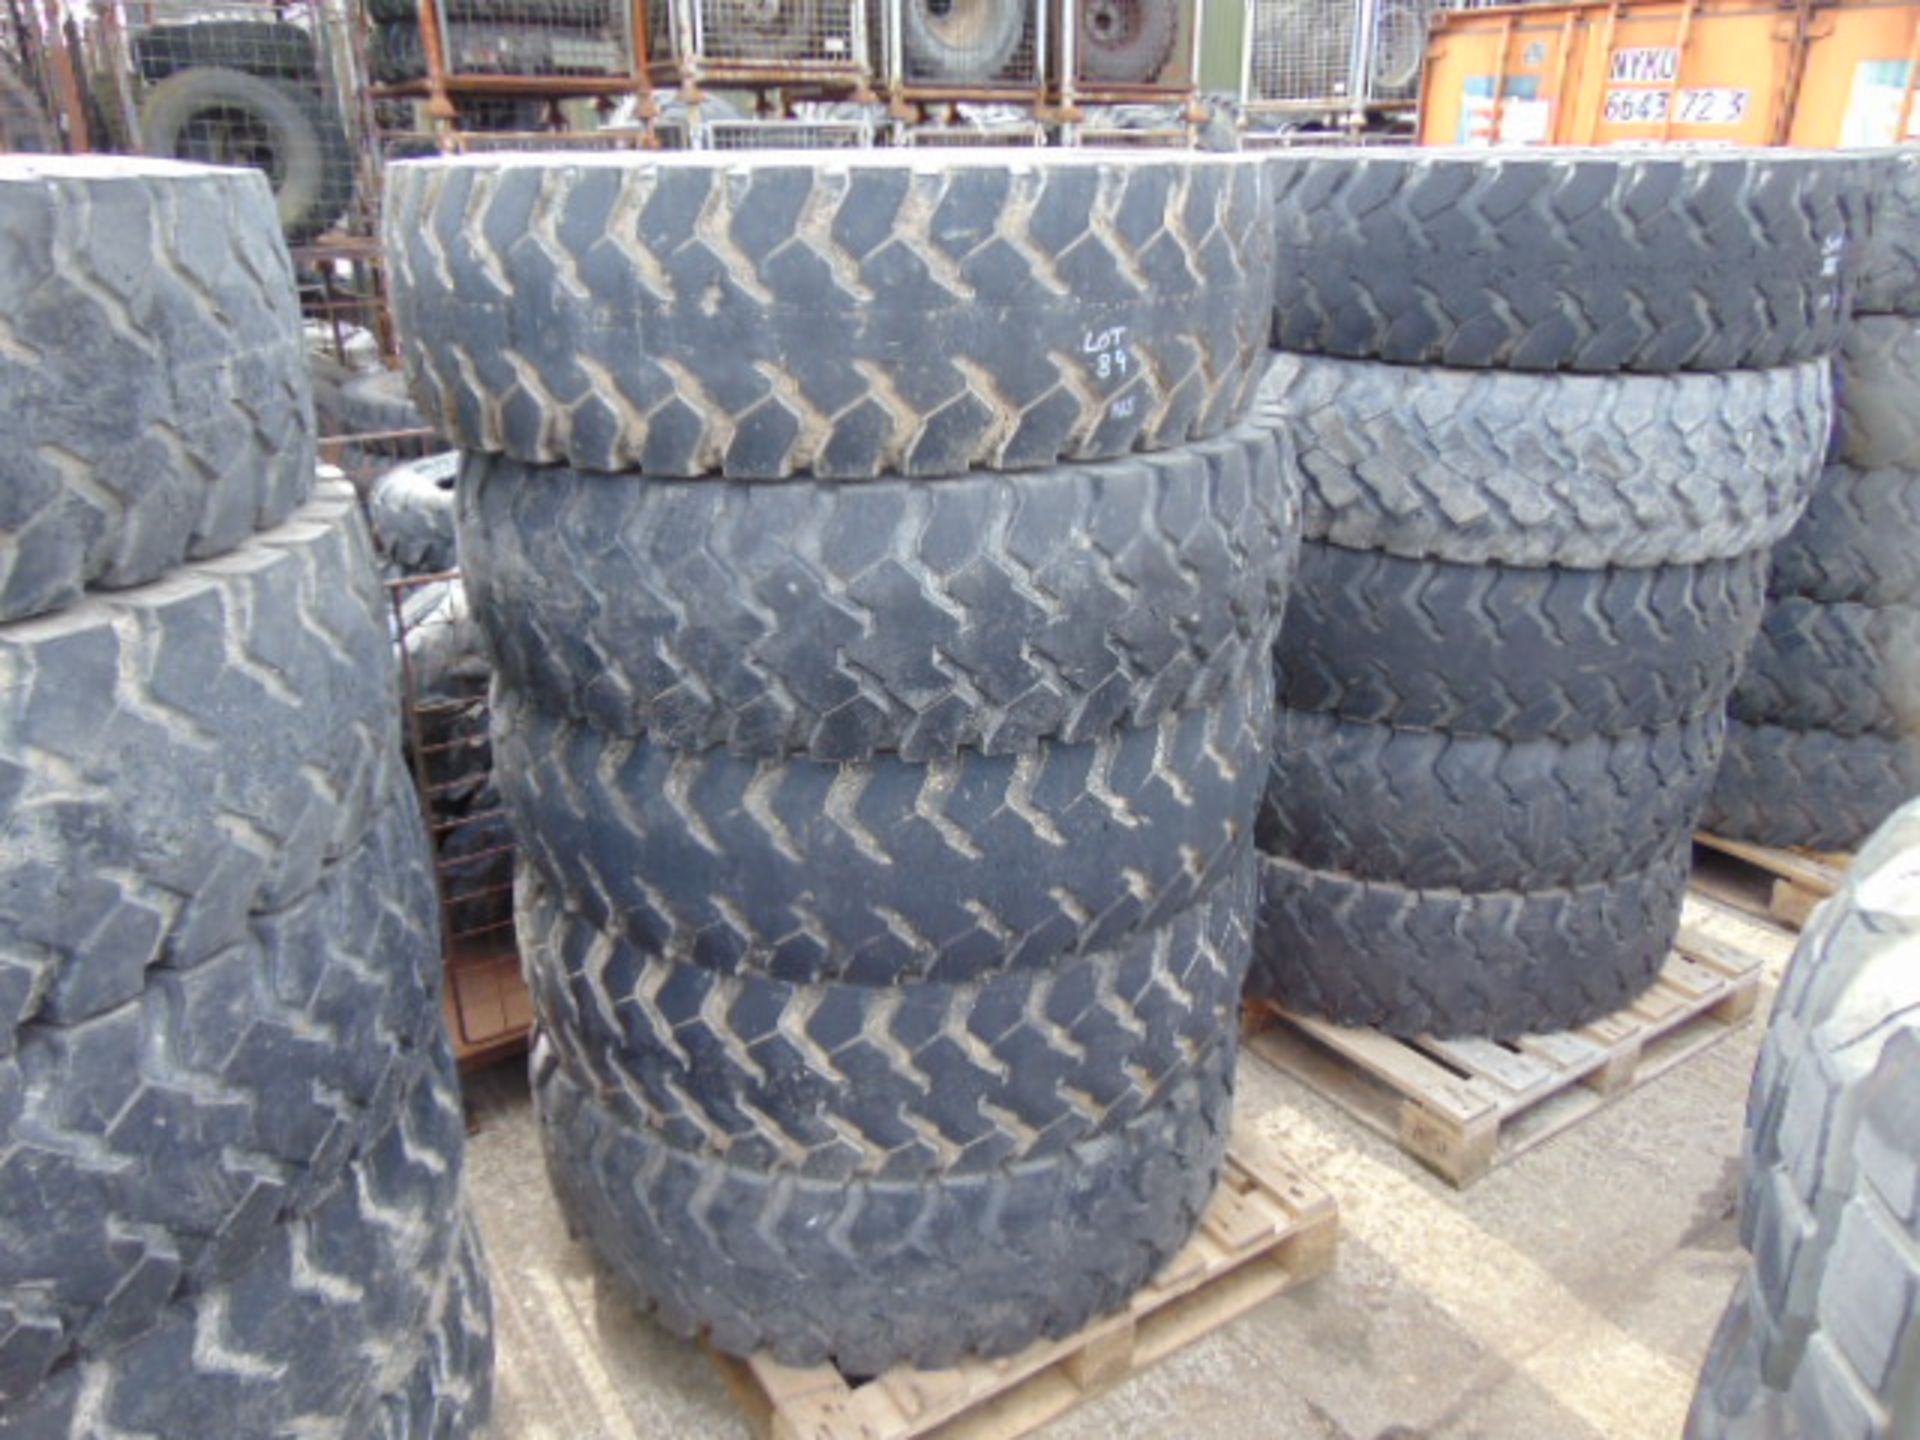 5 x Continental 14.00 R20 Tyres